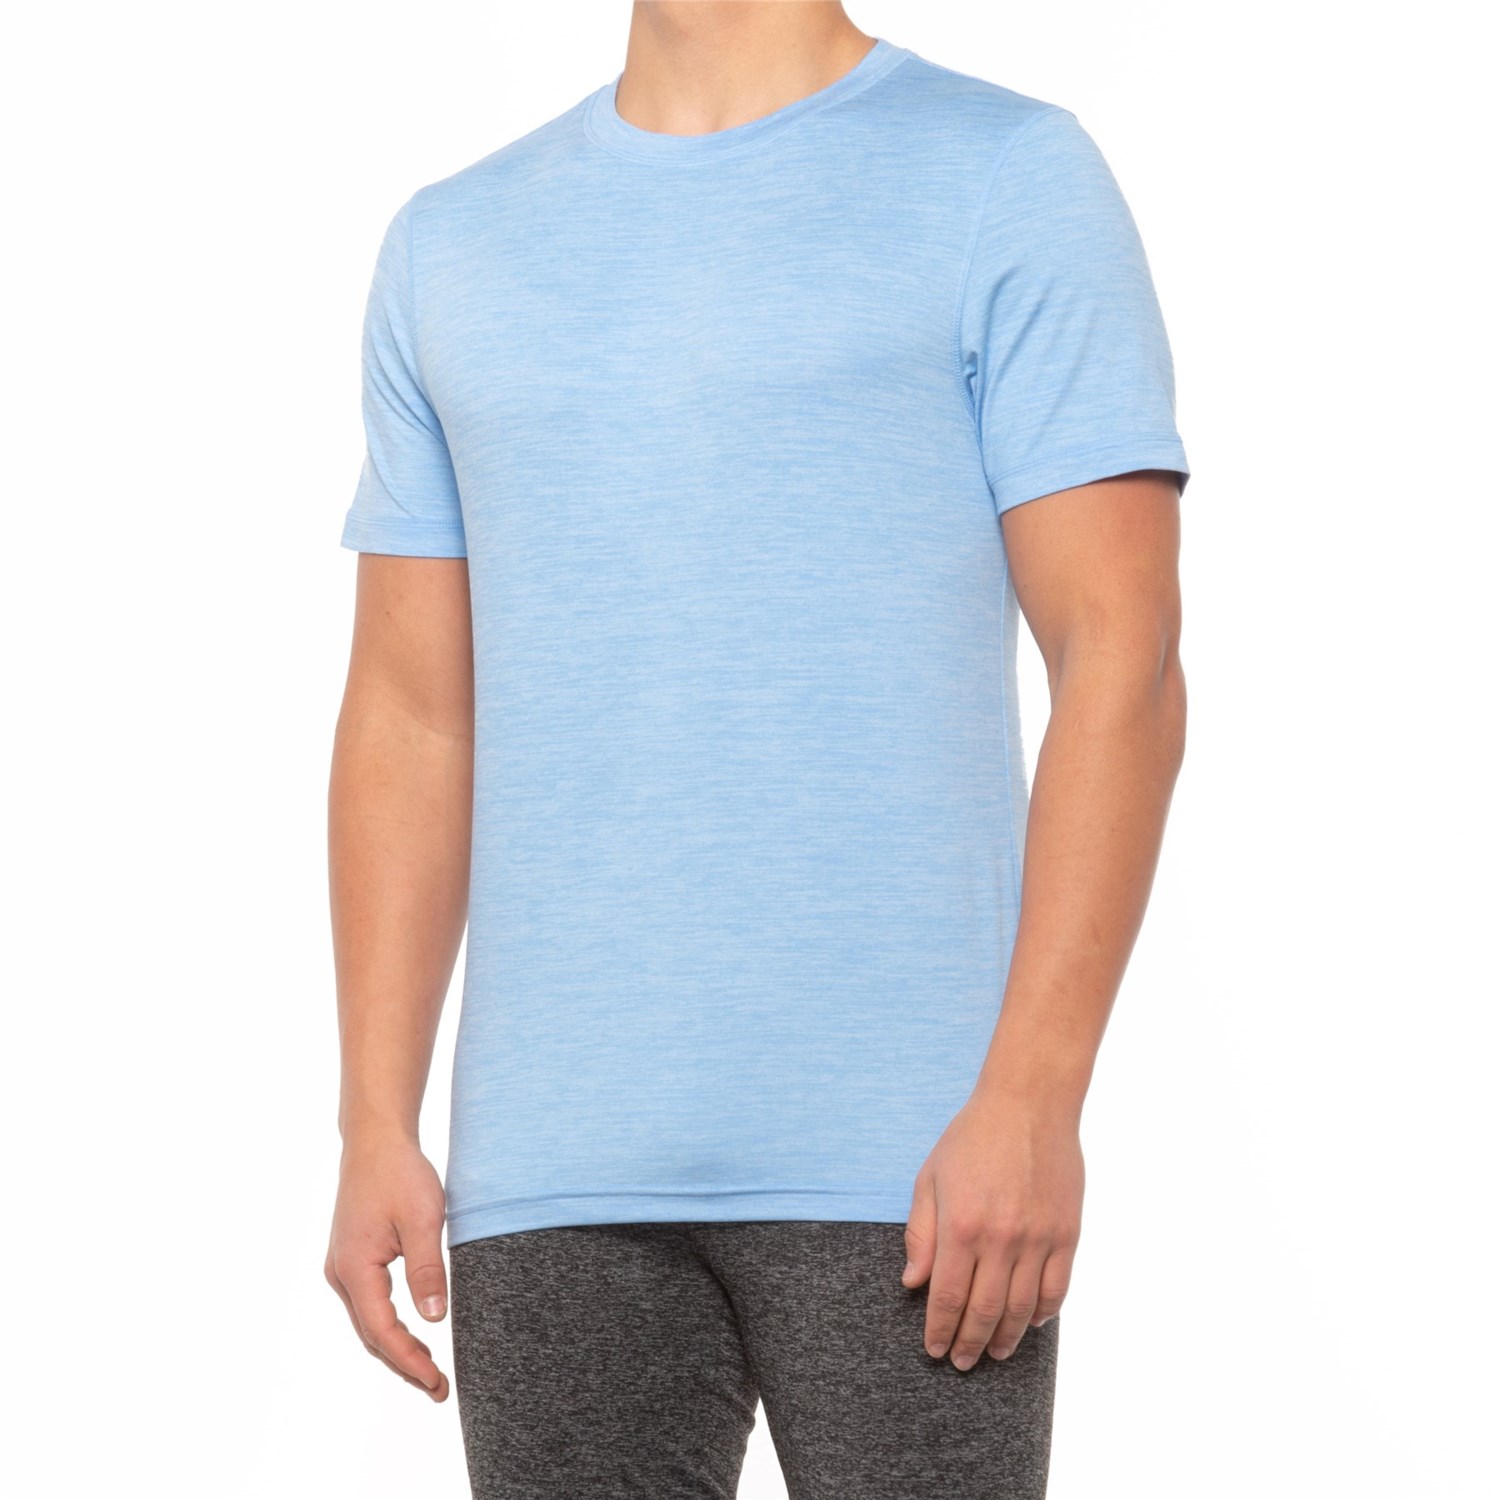 Gaiam Everyday Basic Crew T-Shirt (For Men) - Save 64%